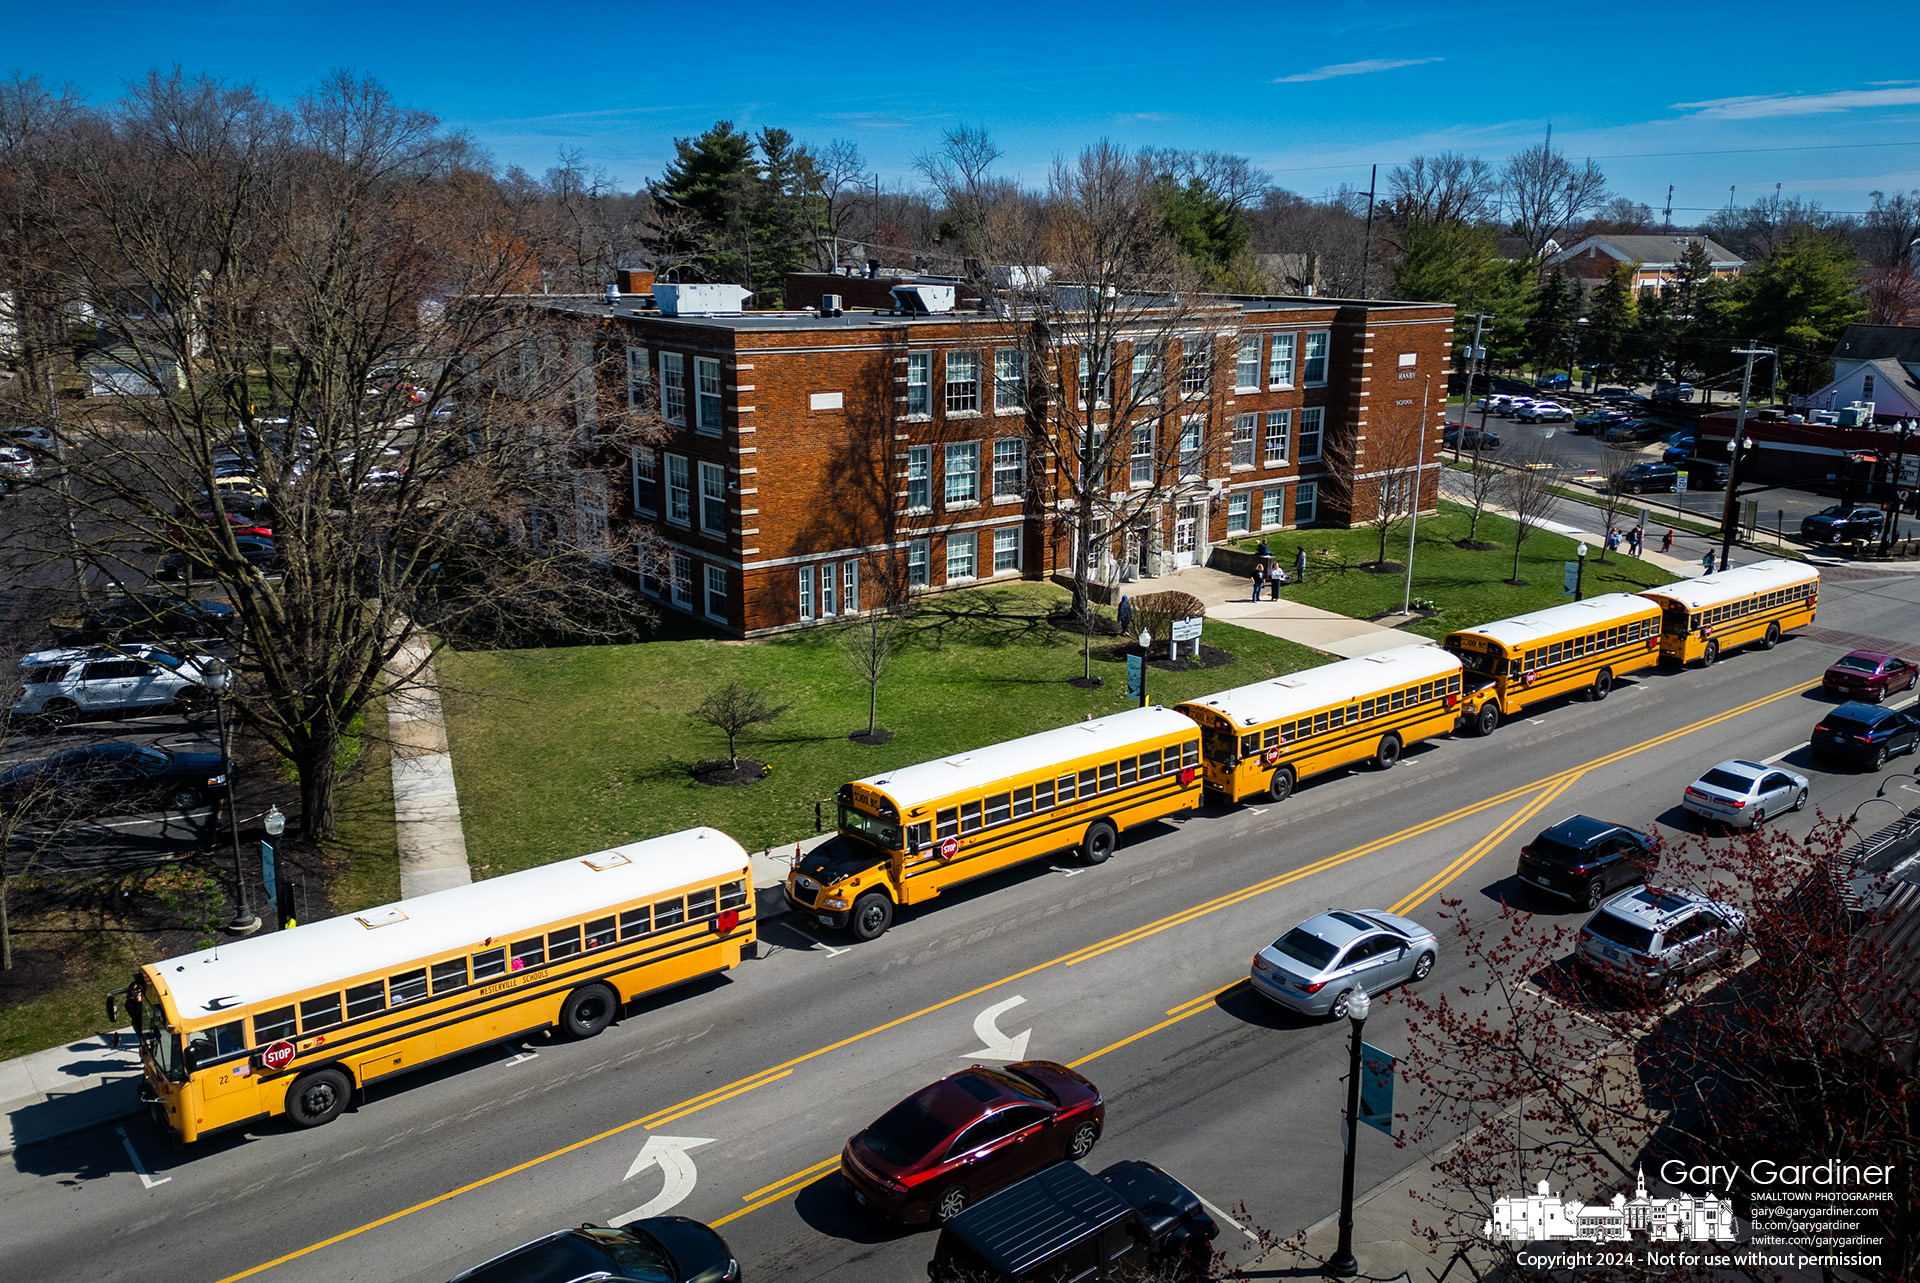 Buses line up in front of Hanby Elementary on State Street preparing to ferry students home after school on Thursday. My Final Photo for March 21, 2024.